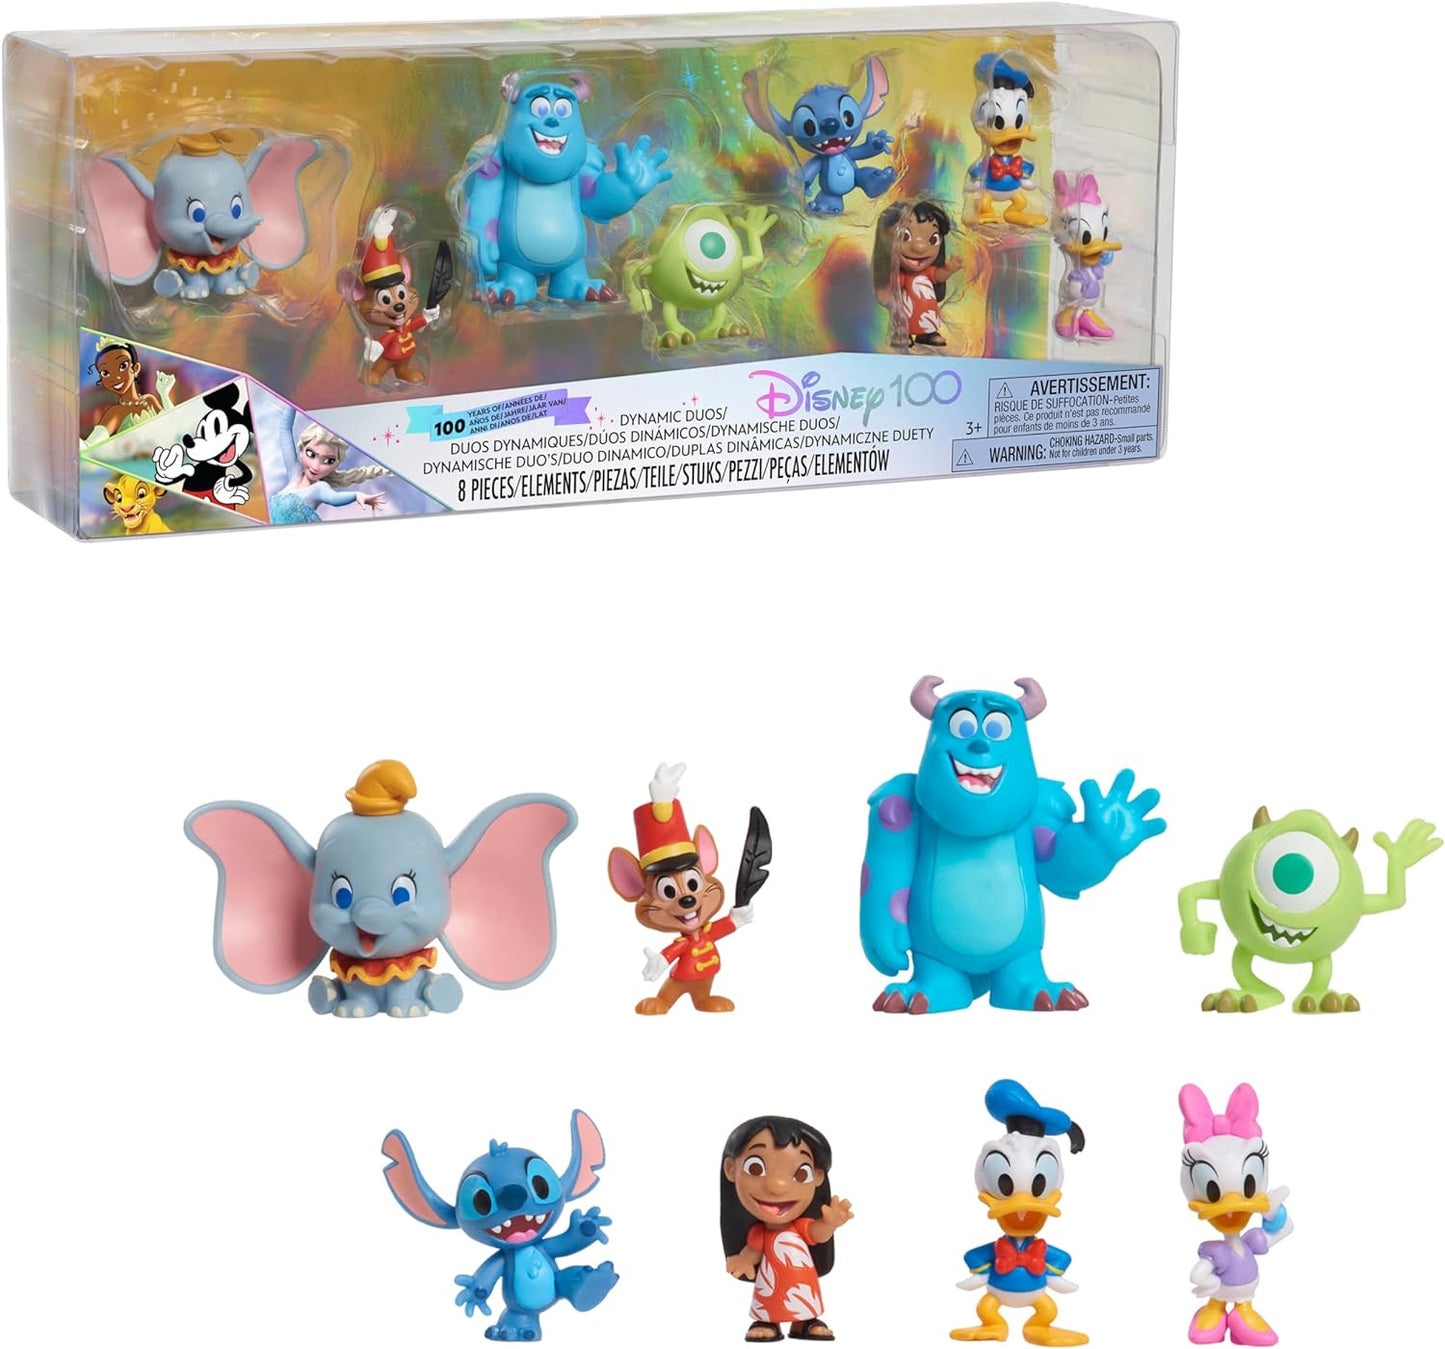 Disney100 Years of Dynamic Duos Celebration Collection Limited Edition 8-Piece Figure Pack, Officially Licensed Kids Toys for Ages 3 Up by Just Play